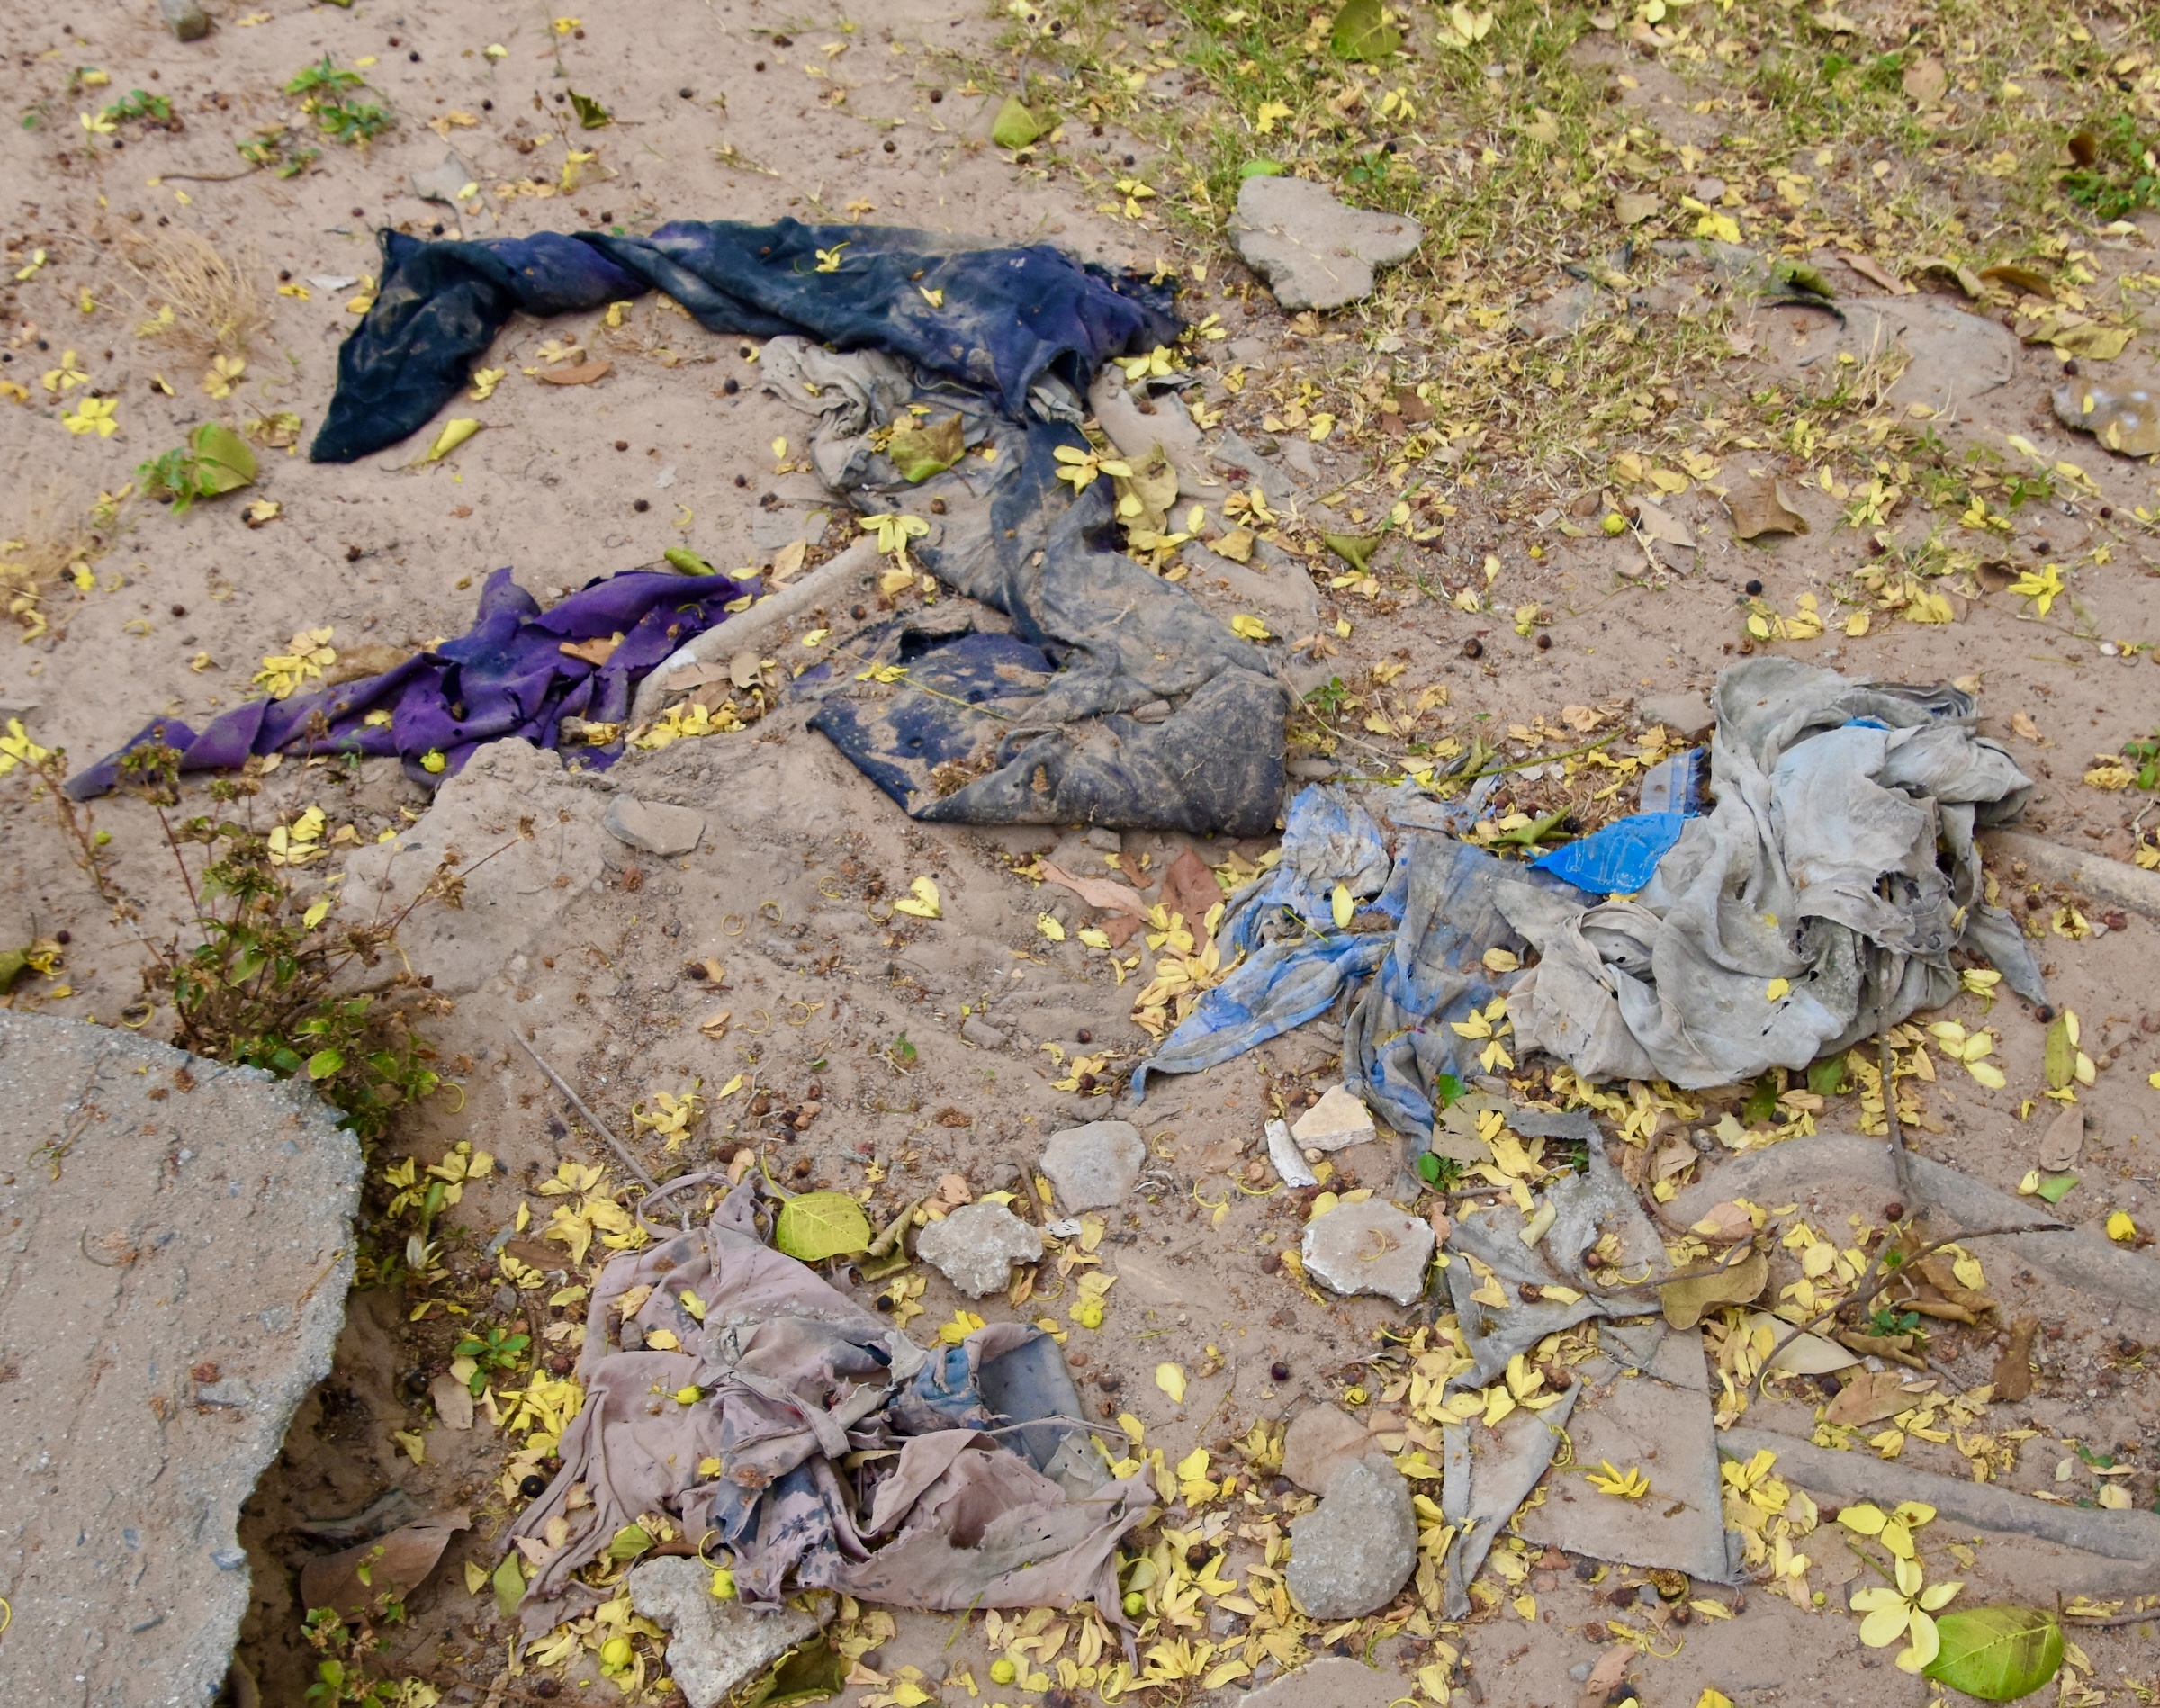 Clothes of the Victims, The Killing Fields